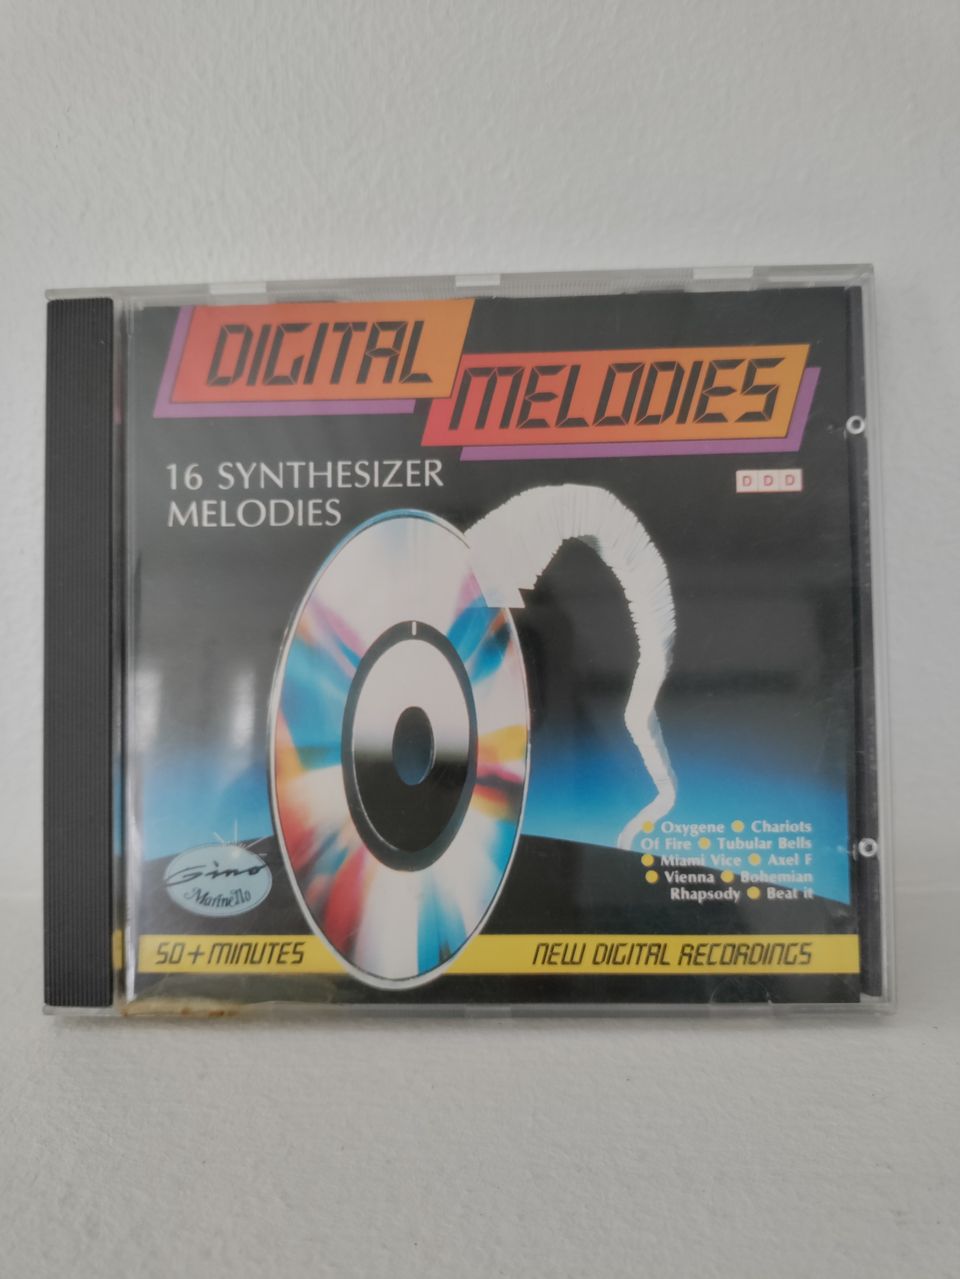 Digital melodies - 16 Synthesizer Melodies CD